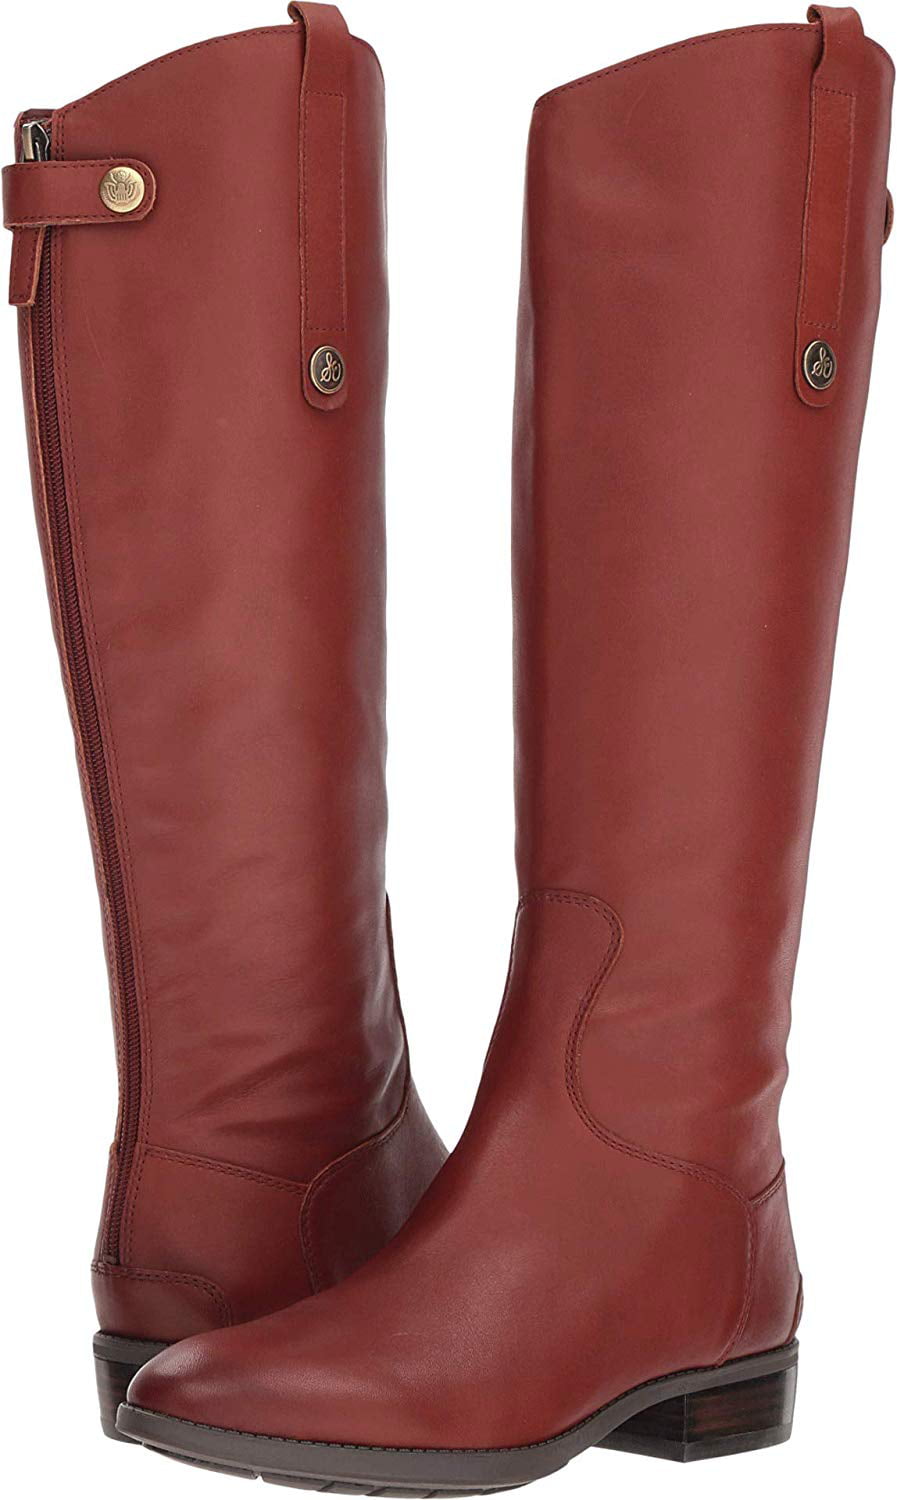 Sam Edelman Women's Penny Riding Boot Leather Knee High Western Cowgirl Cowboy 